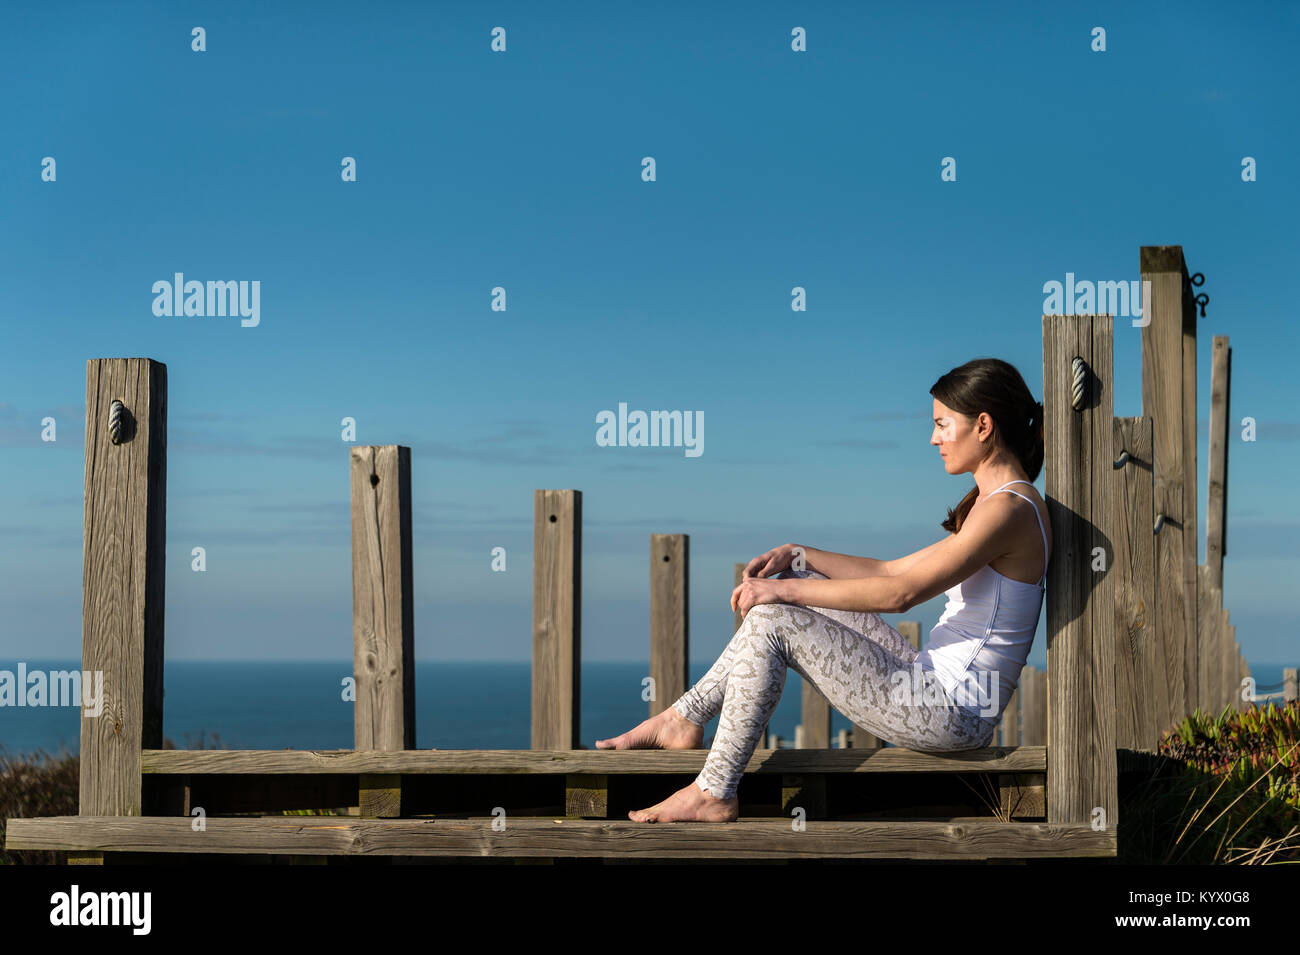 woman sitting on wooden steps by the sea, thinking and relaxing in the sun. Stock Photo